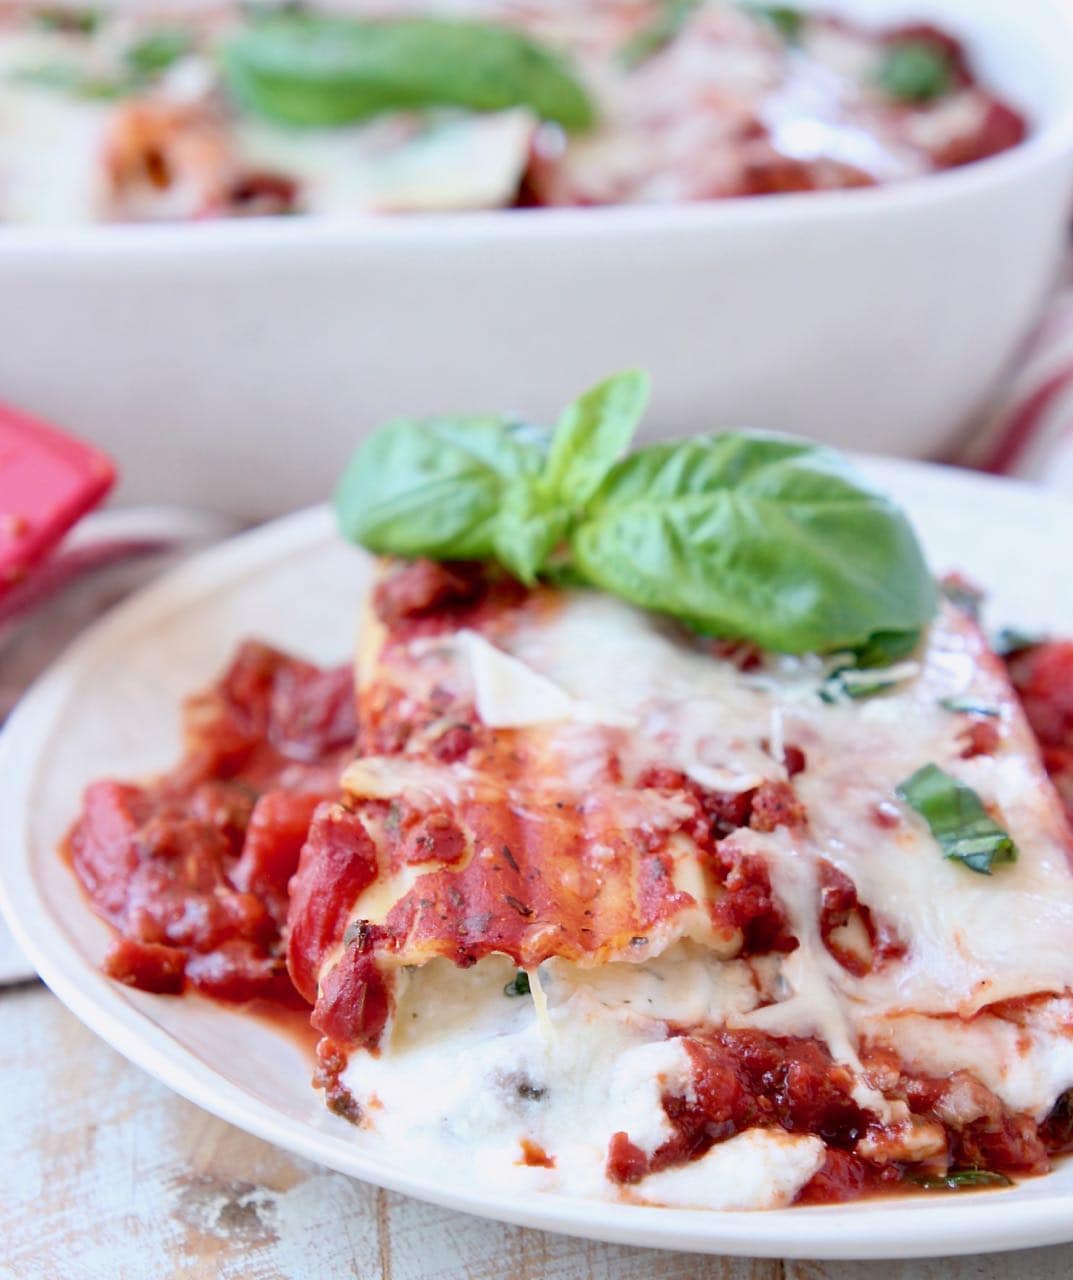 Cheese manicotti on plate, topped with marinara sauce and fresh basil leaves